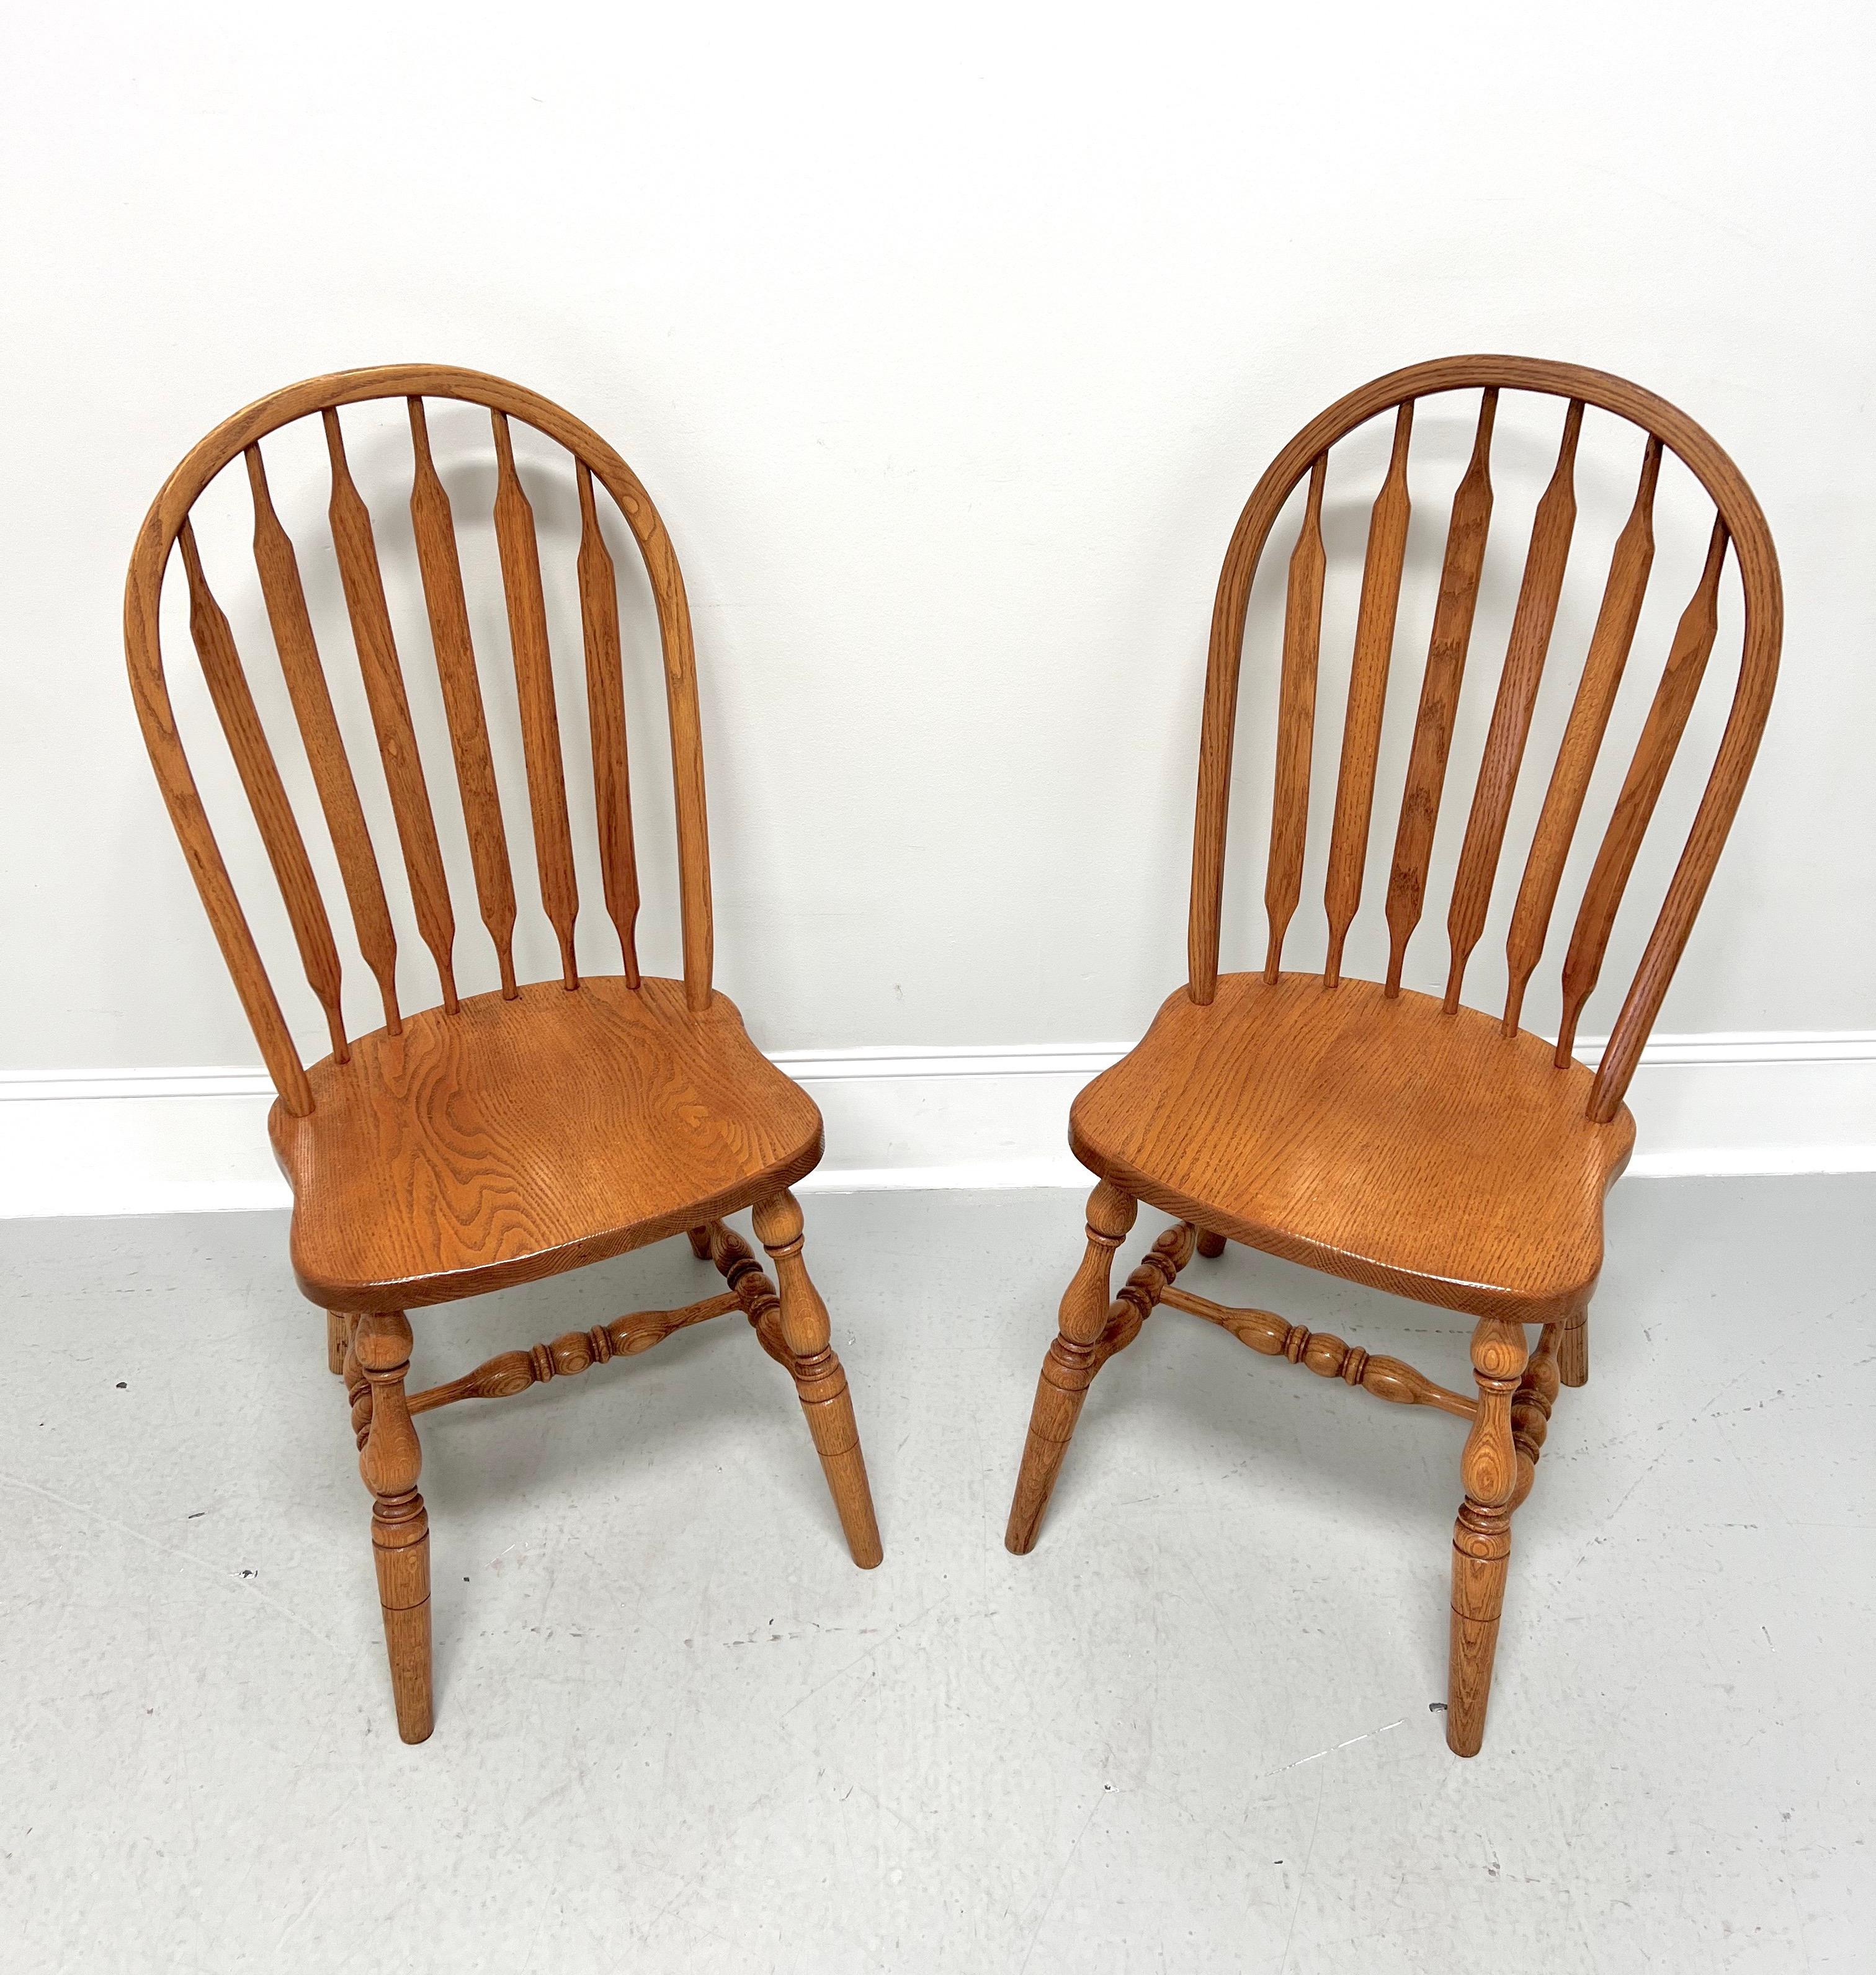 A pair of handcrafted Windsor dining side chairs in the Rockford style by Amish craftsmen. Solid oak, bowback, cattail spindles, solid seat, turned legs, and turned stretchers.  Made in the USA, in the late 20th Century.
 
Measures:  18w 23d 40h,